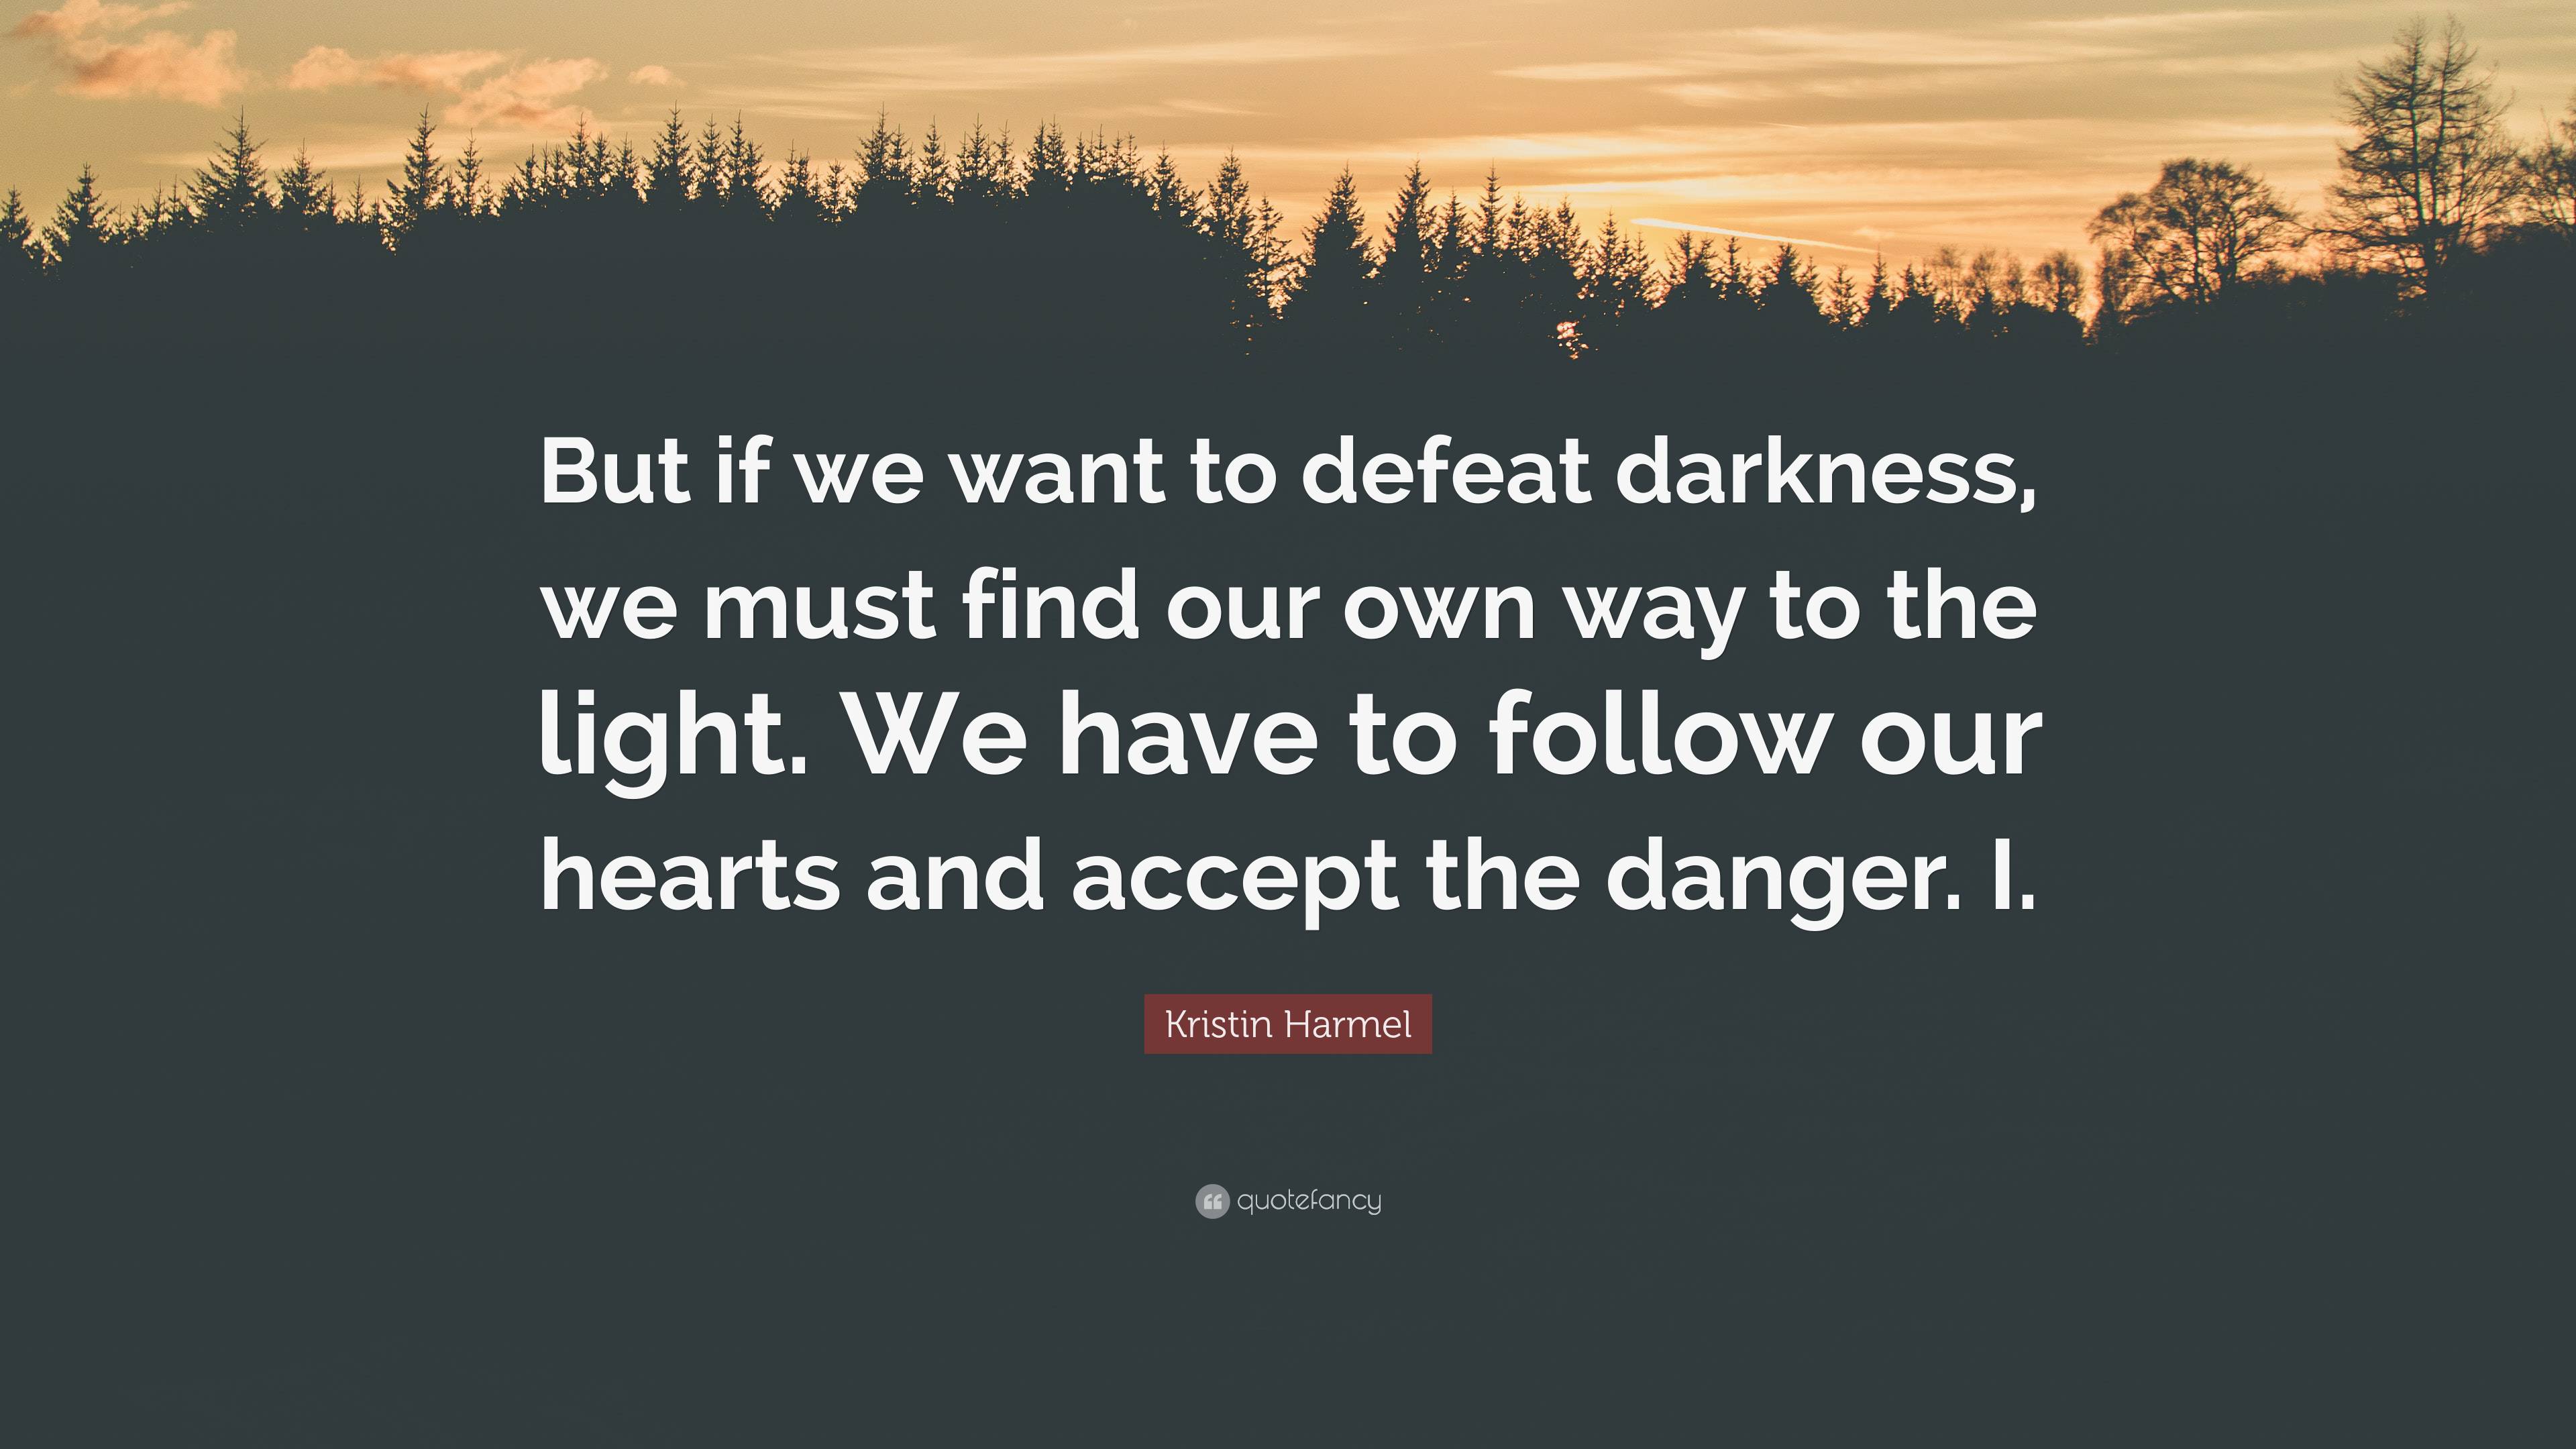 Kristin Harmel Quote: “But if we want to defeat darkness, we must find ...